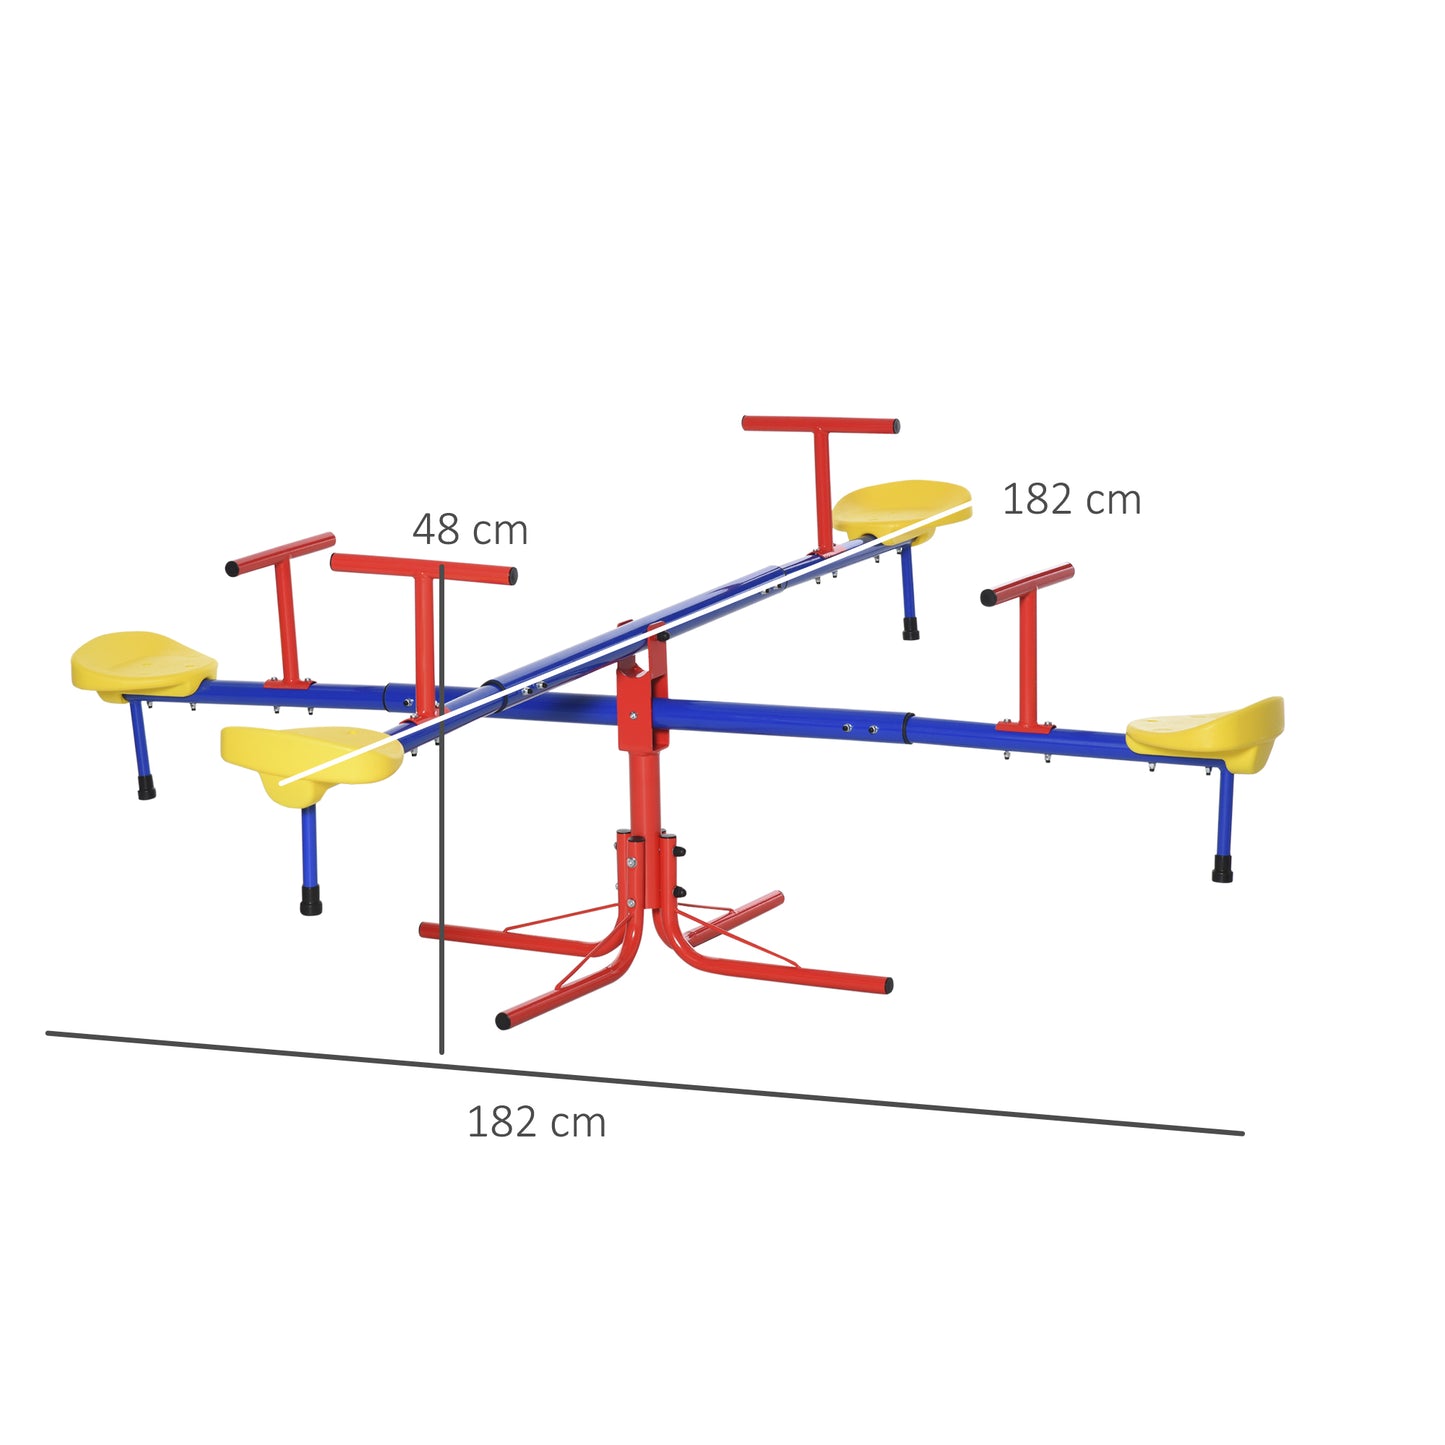 Outsunny Kids Metal Seesaw Teeter Totter Children's Playground Equipment 4 Seats